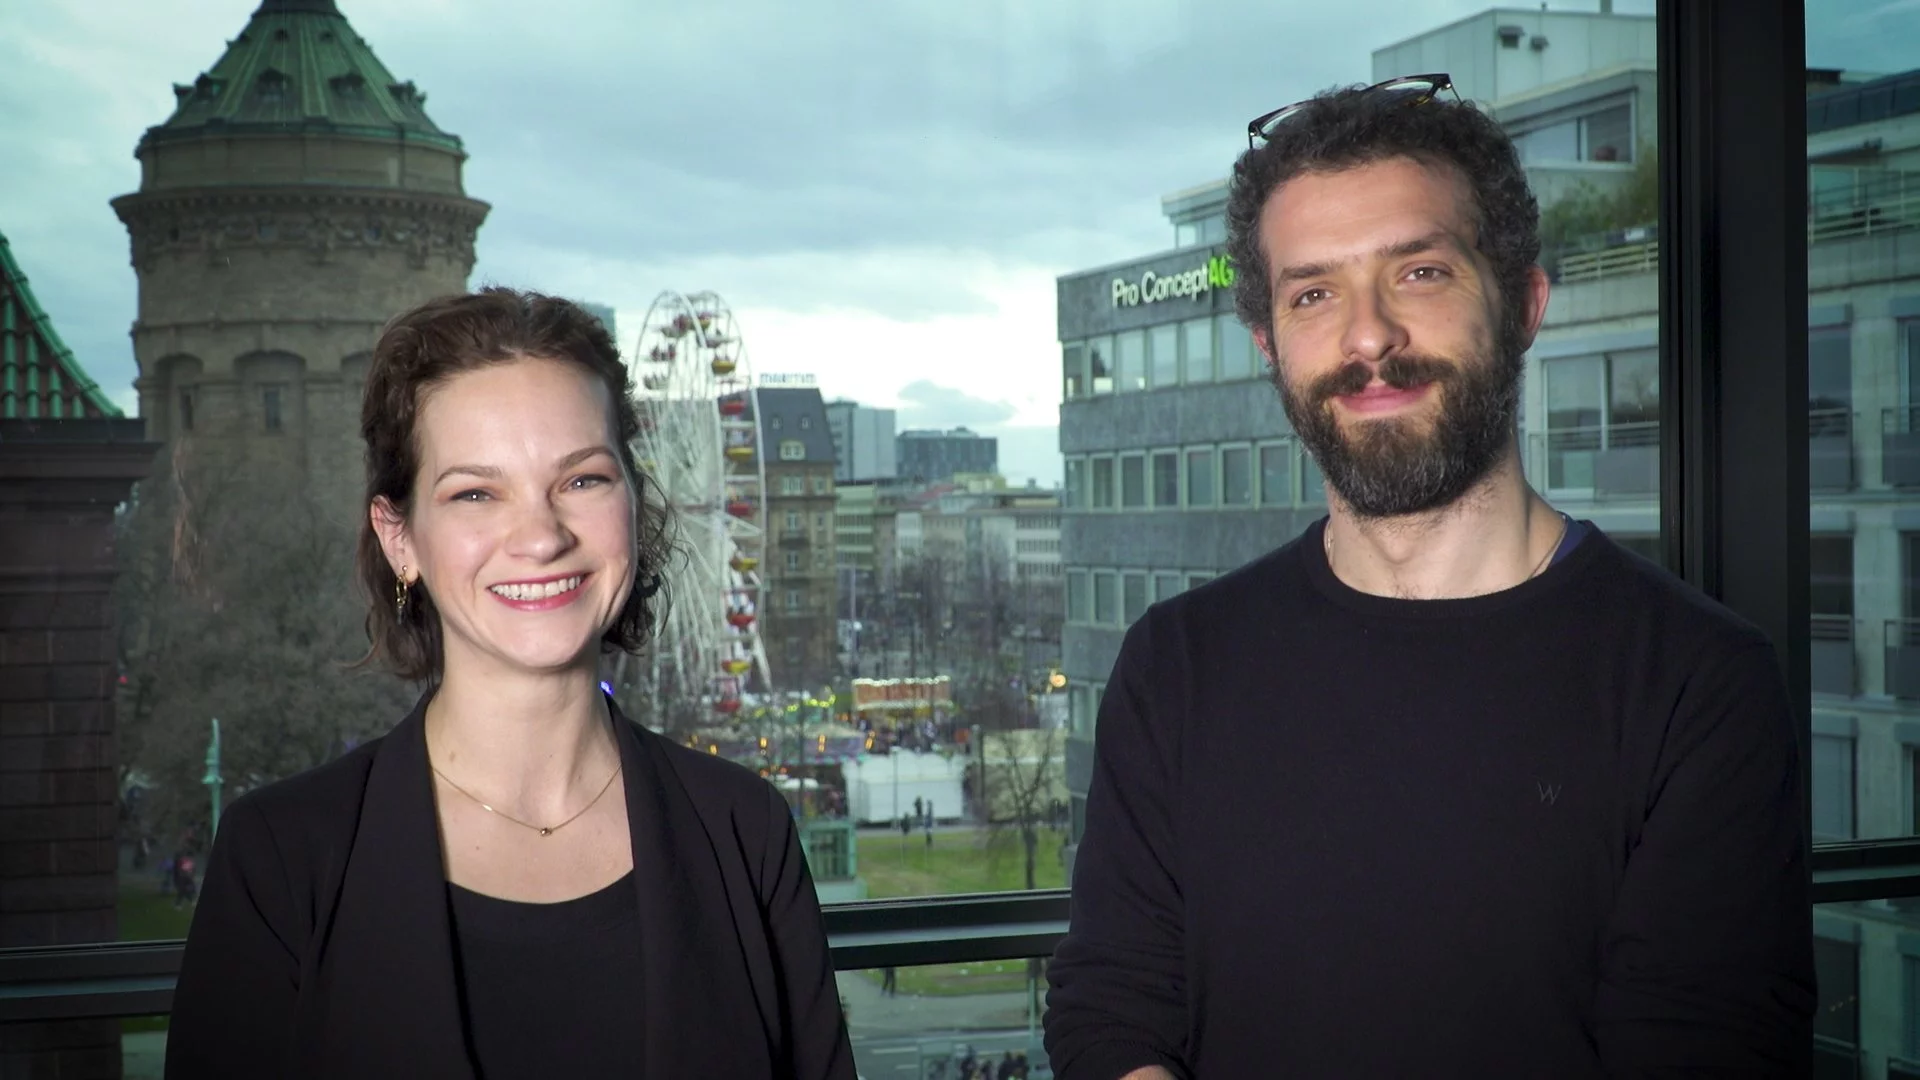 Hilary Hahn and Omer Meir Wellber talk about Bach